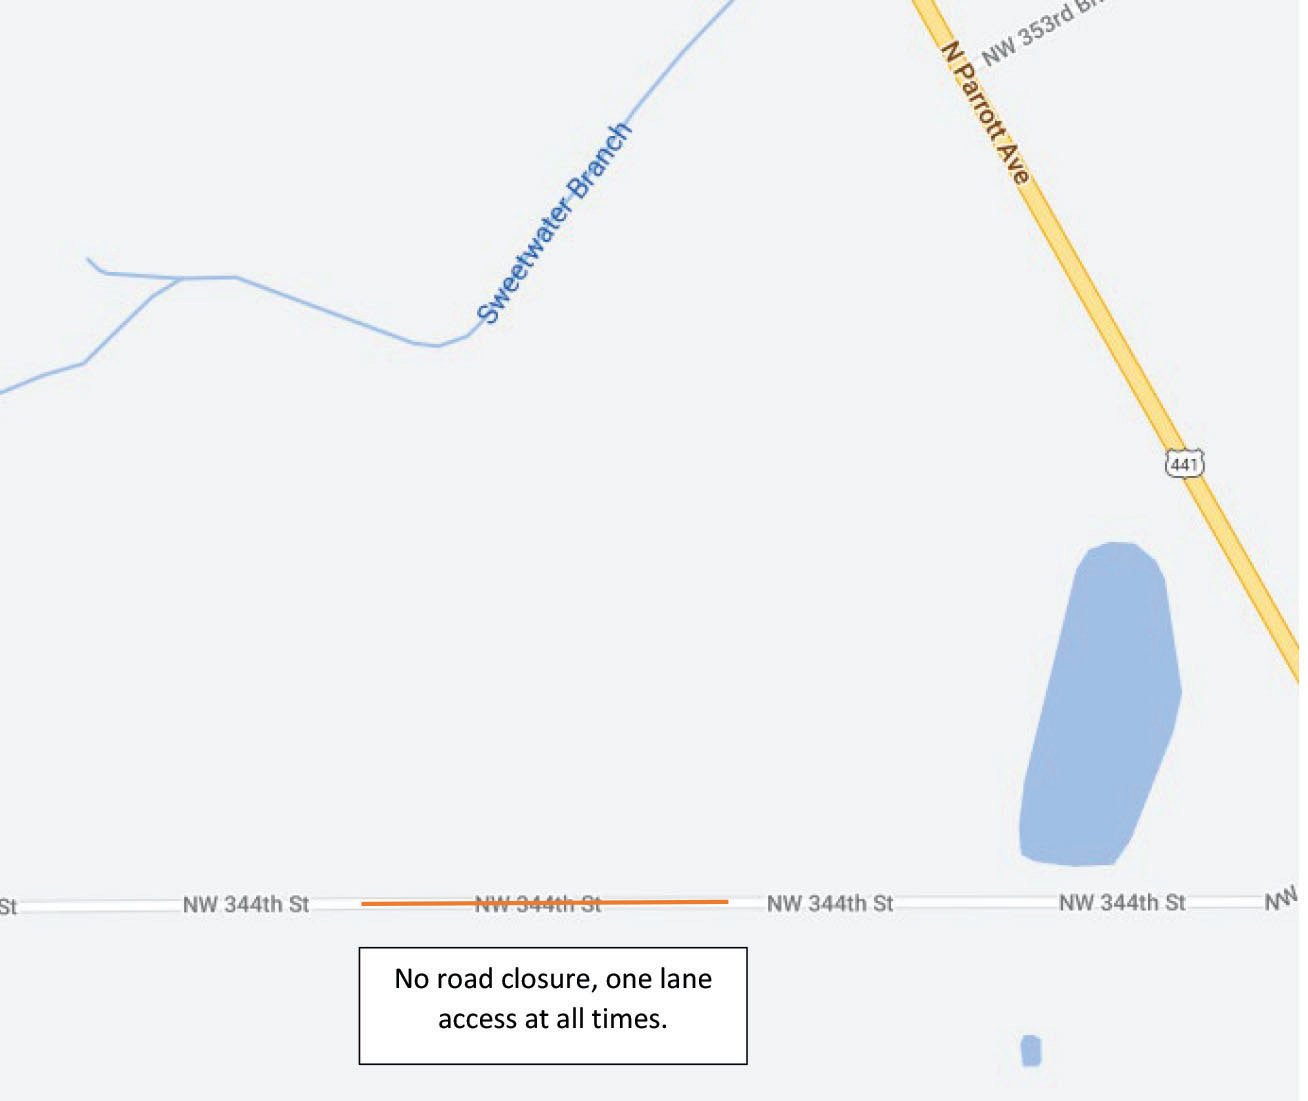 This map shows the area of the one lane access to N.W. 342nd Trail